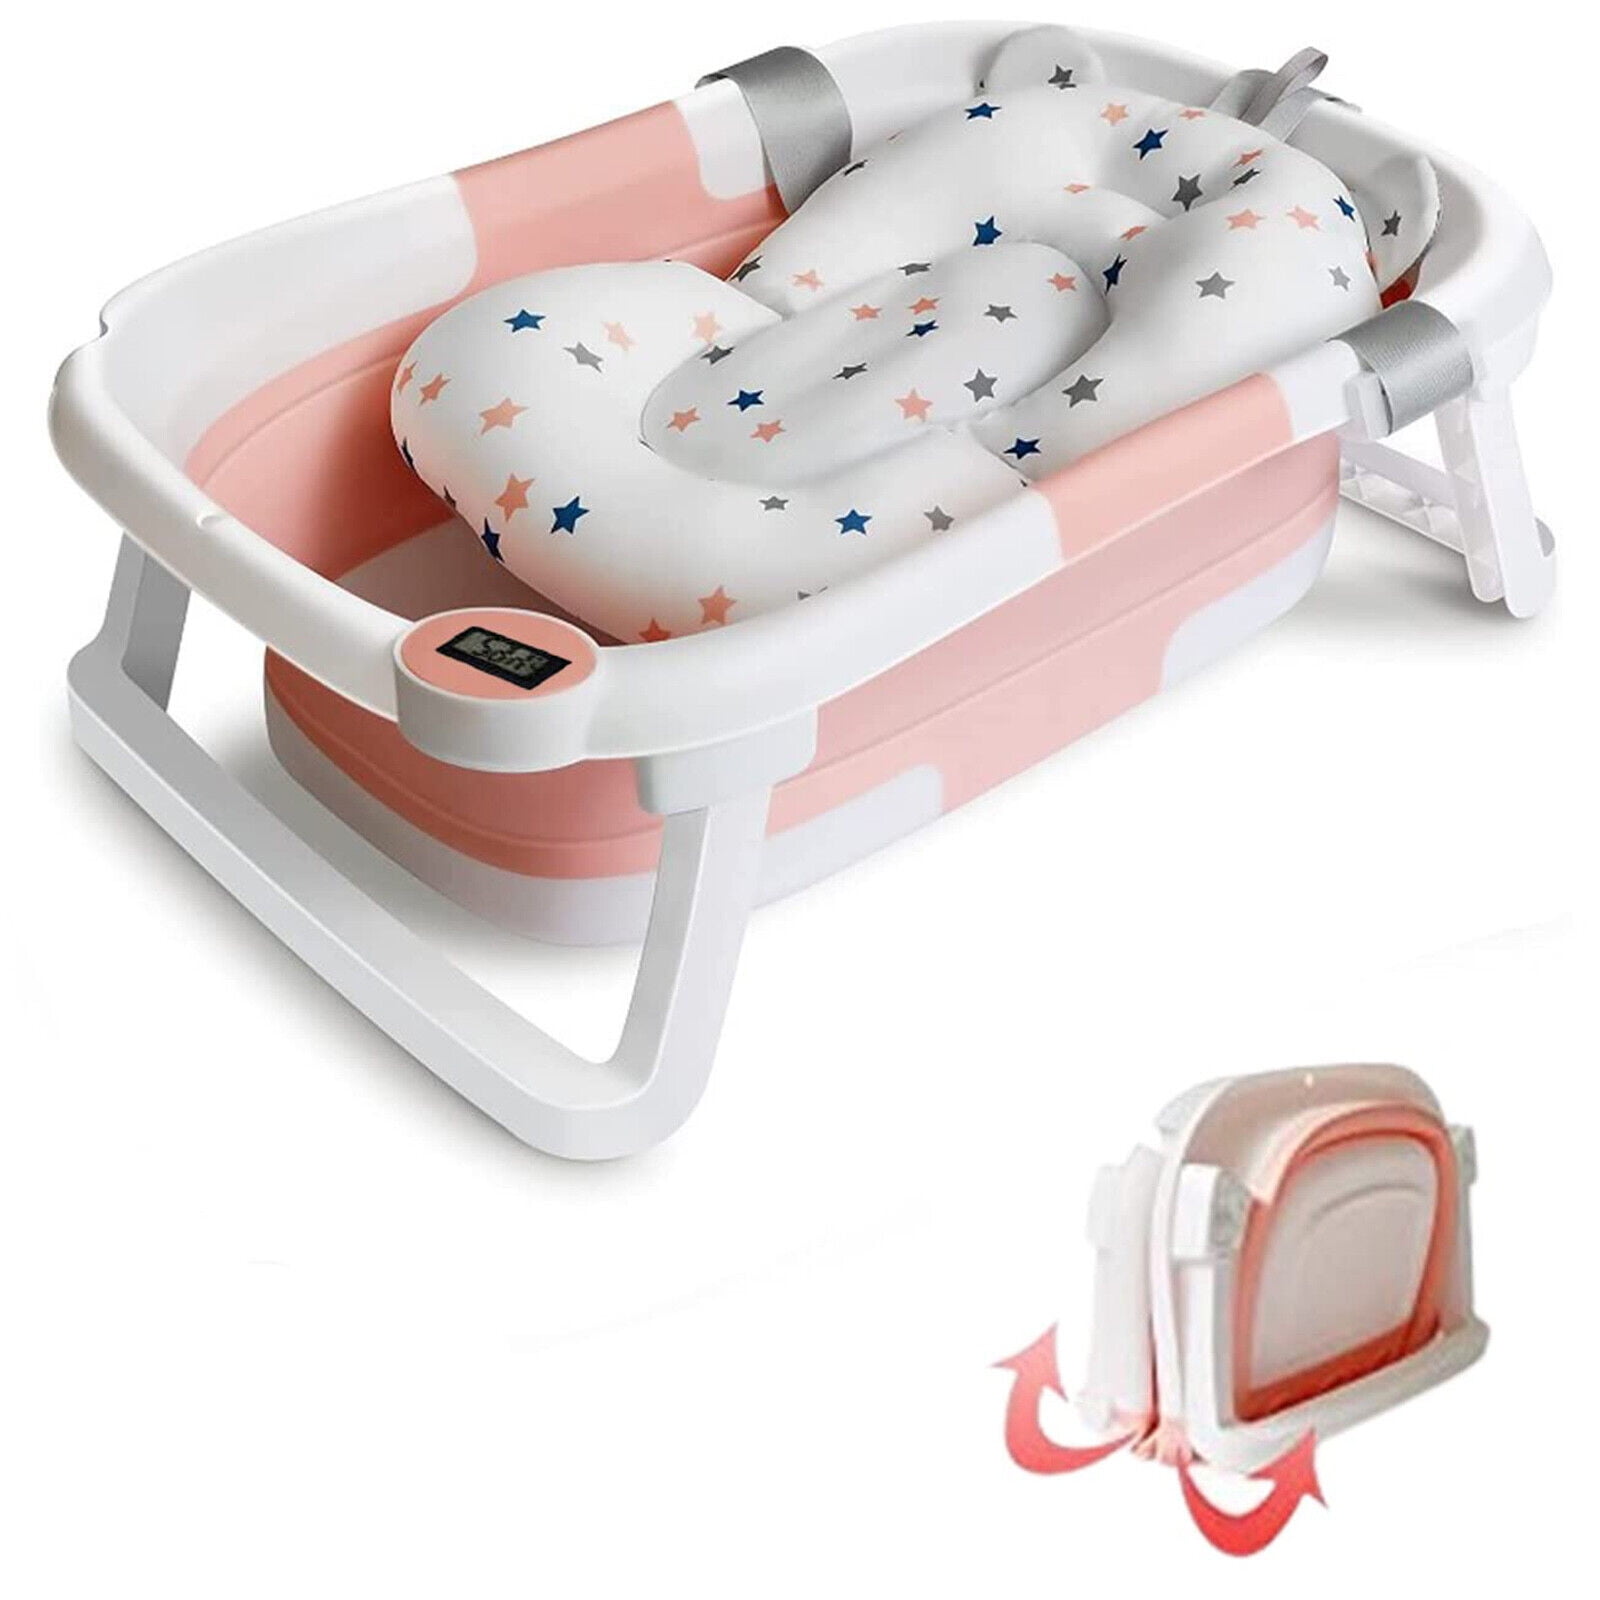 BORDSTRACT 15.0x10.4in Baby Infant Bath Seat Folding Babies